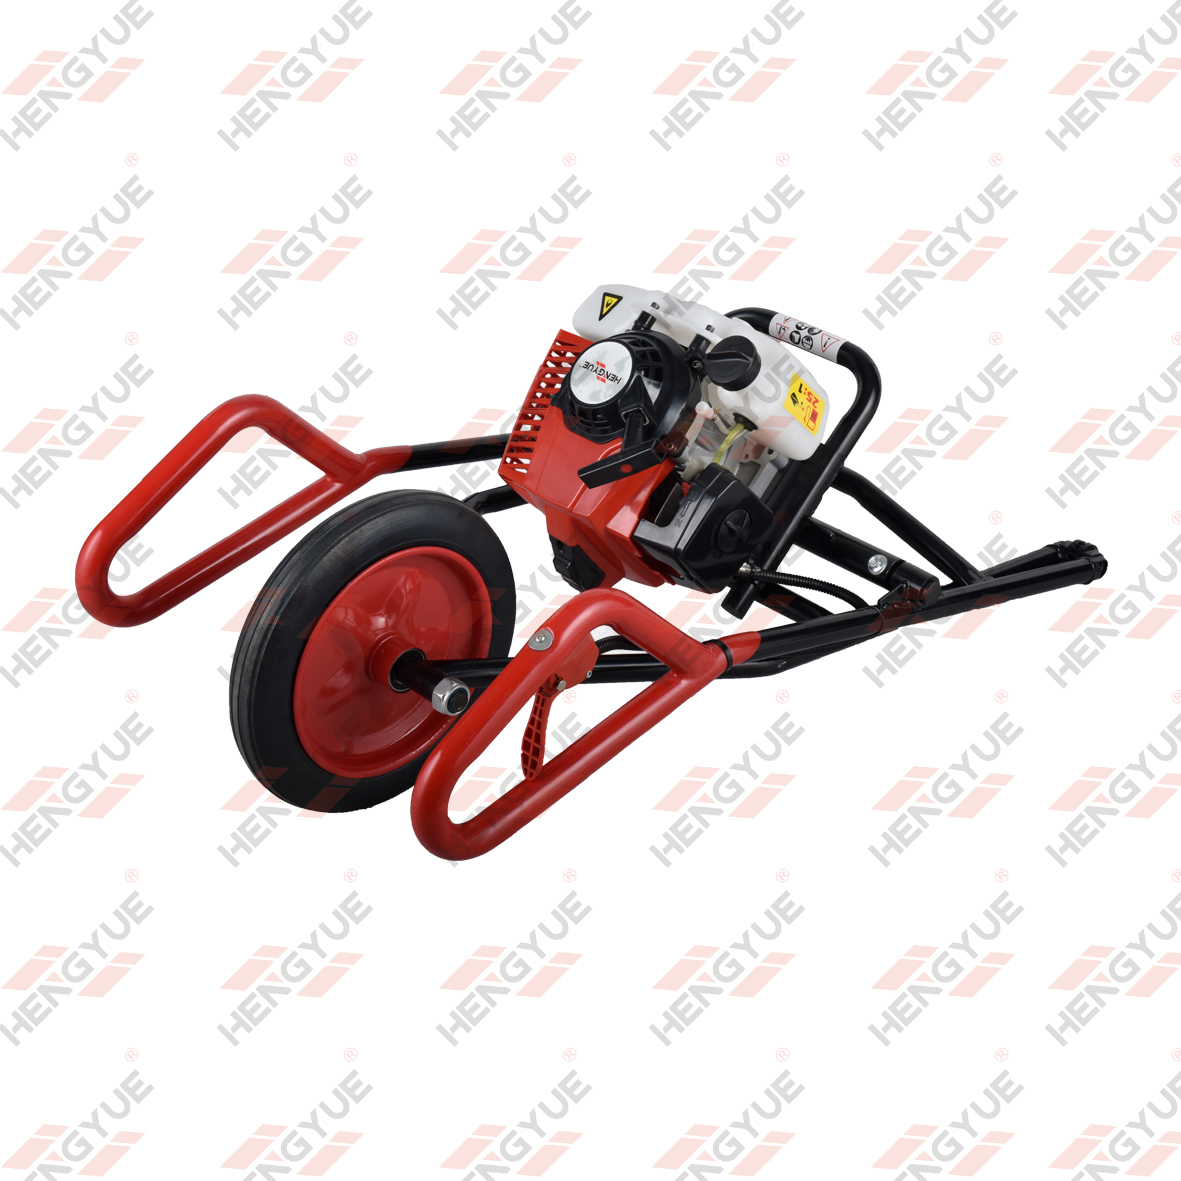 Powered by HONDA GX50 , with Shelf And Wheel Type Earth Auger 